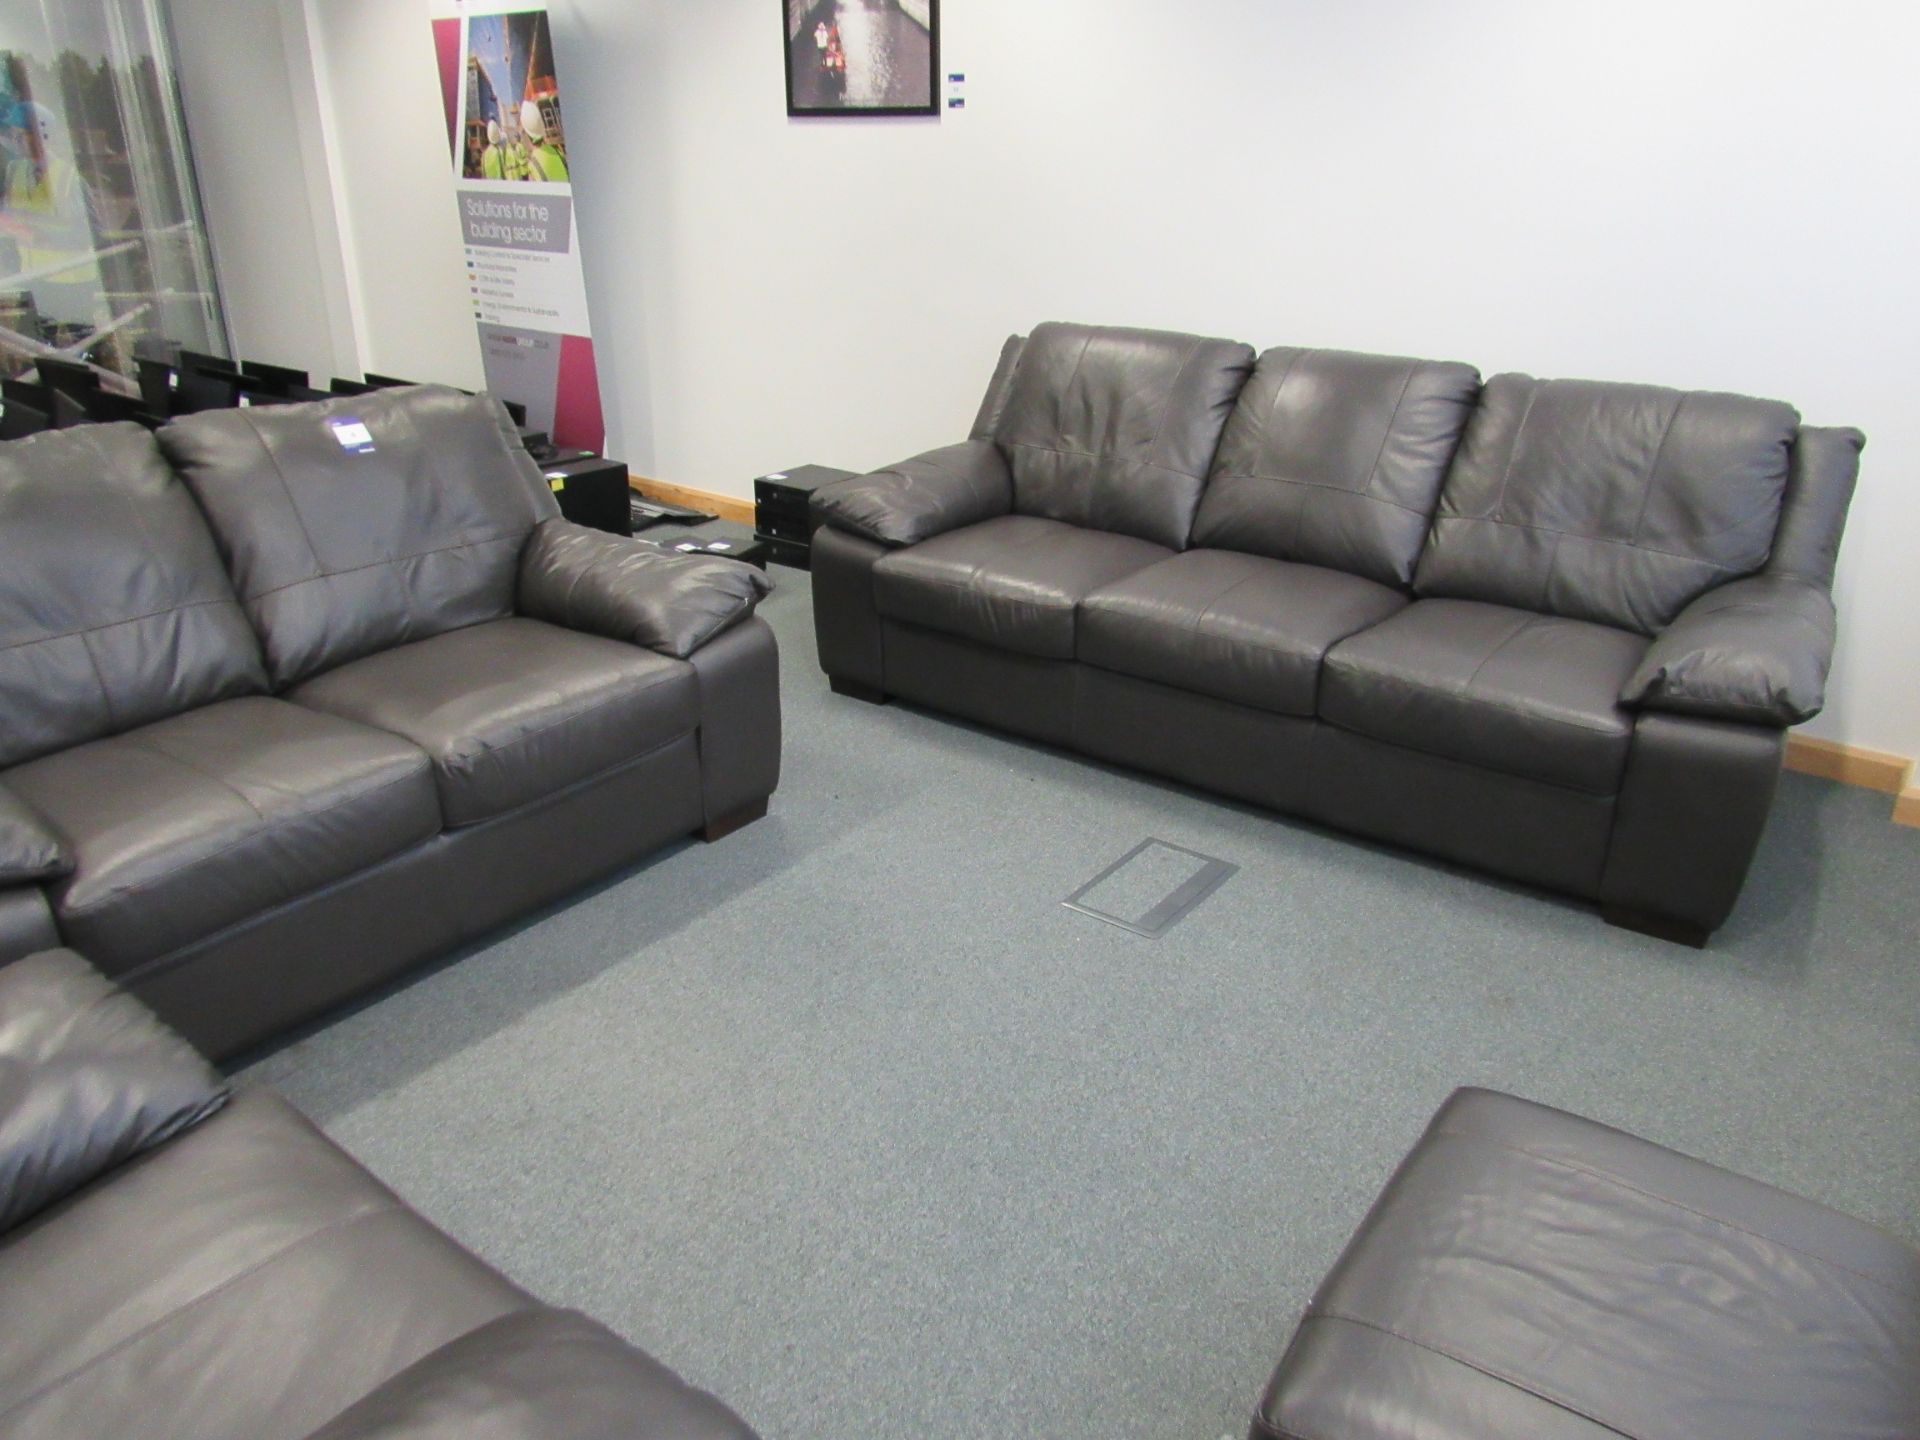 3 Piece Leather Effect Suite with Pouf - Image 2 of 3